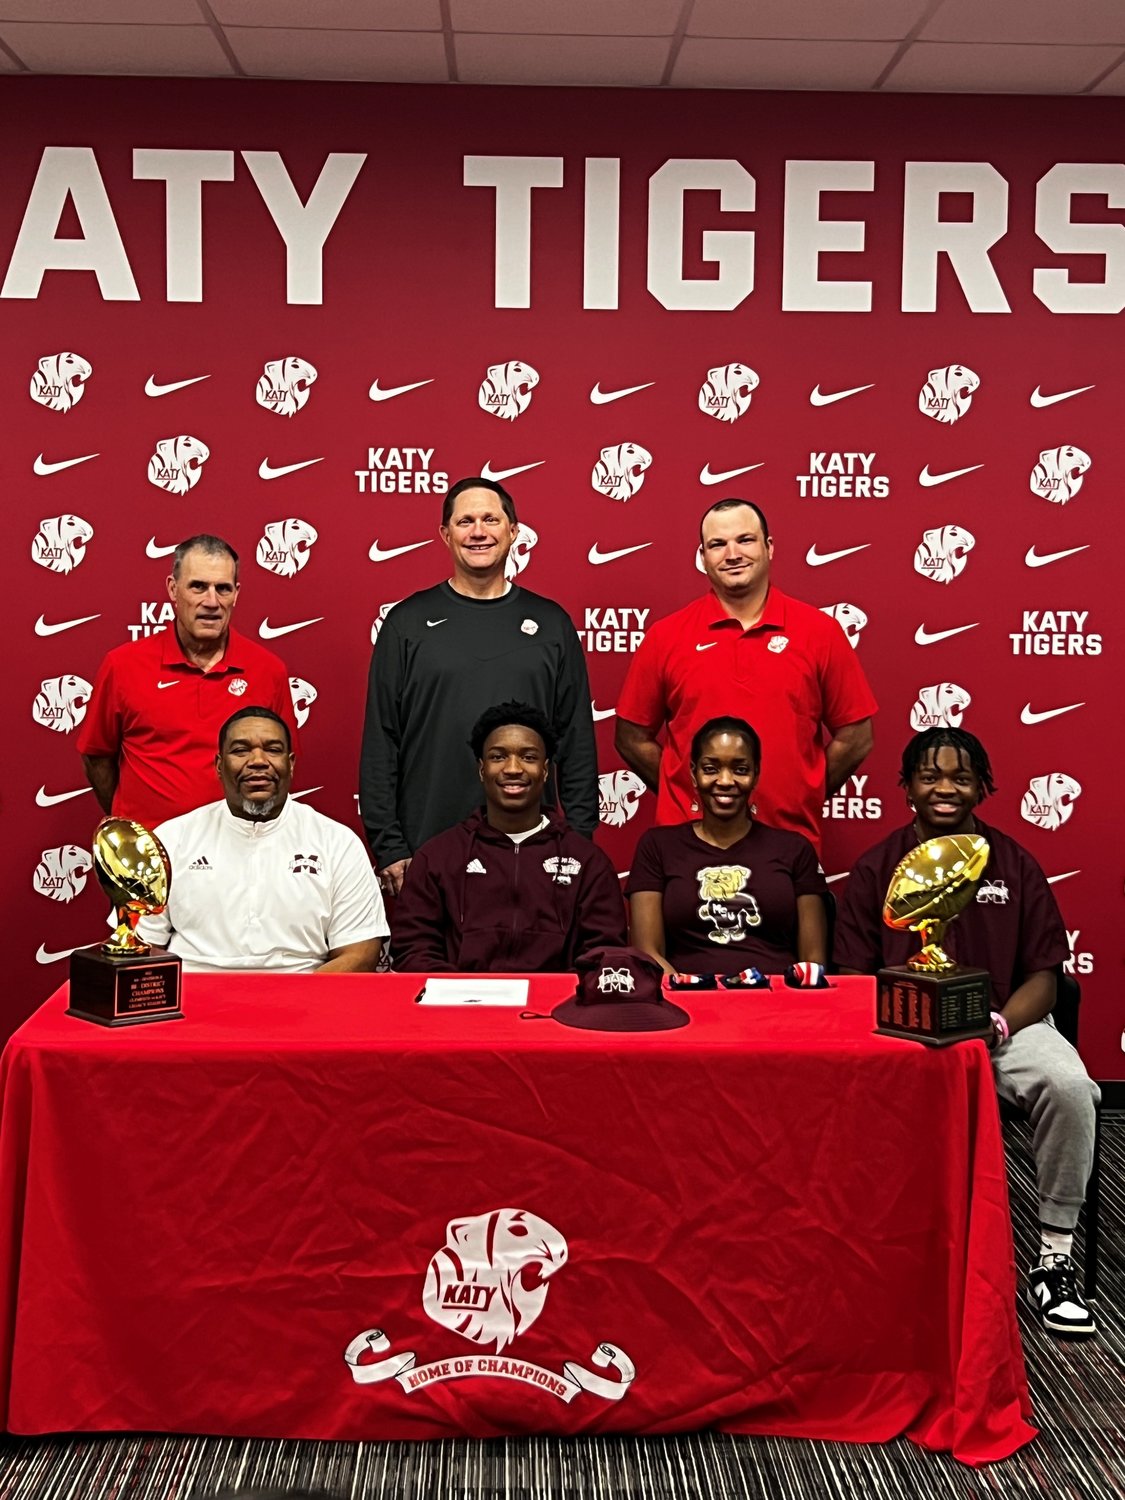 Seth Davis signed to play at Mississippi State over the winter signing period.